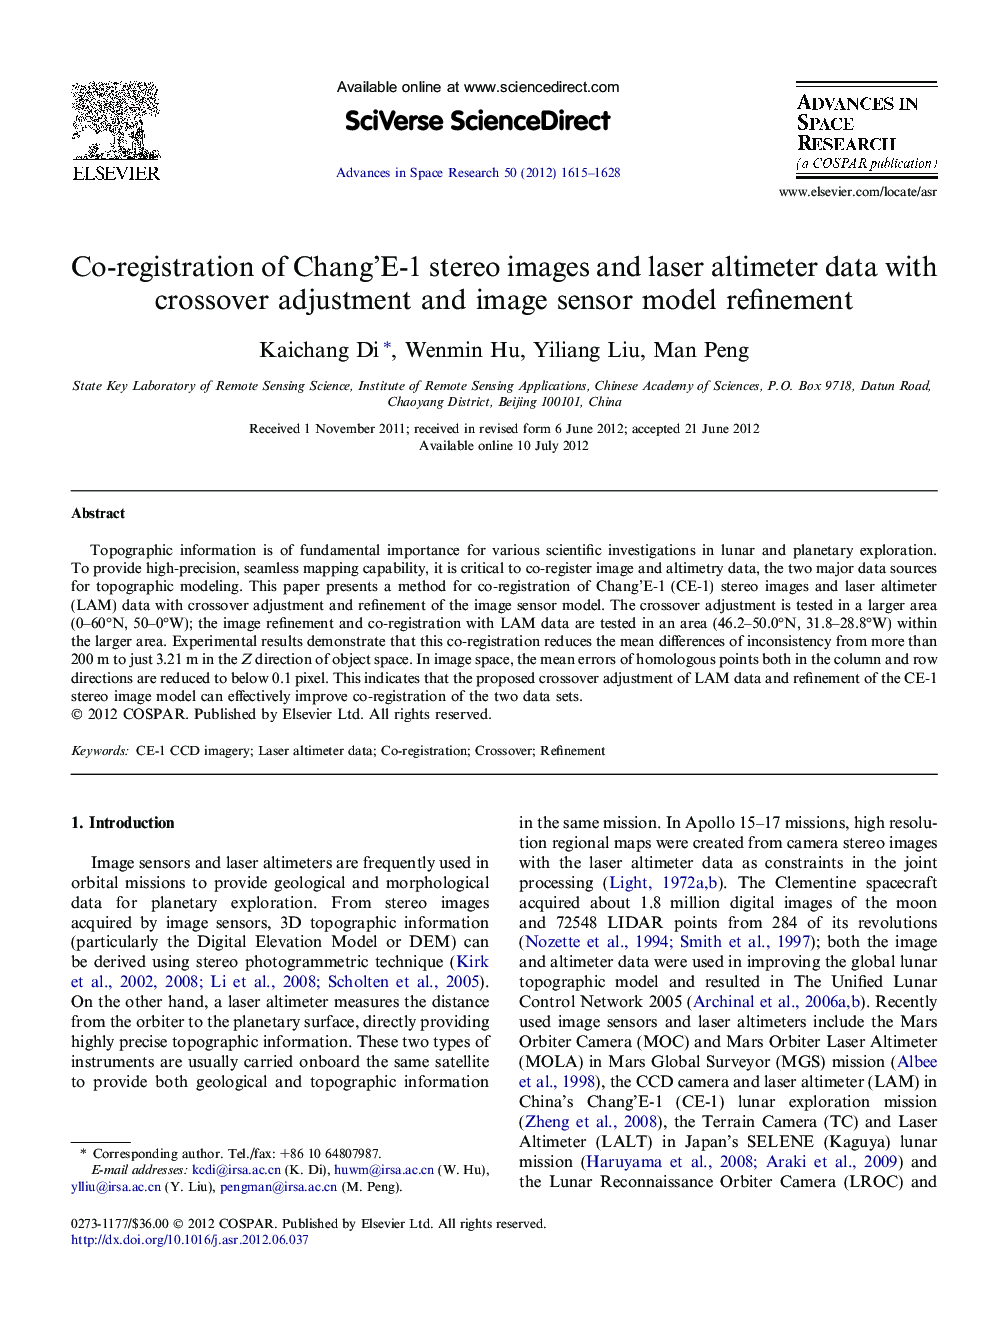 Co-registration of Chang’E-1 stereo images and laser altimeter data with crossover adjustment and image sensor model refinement